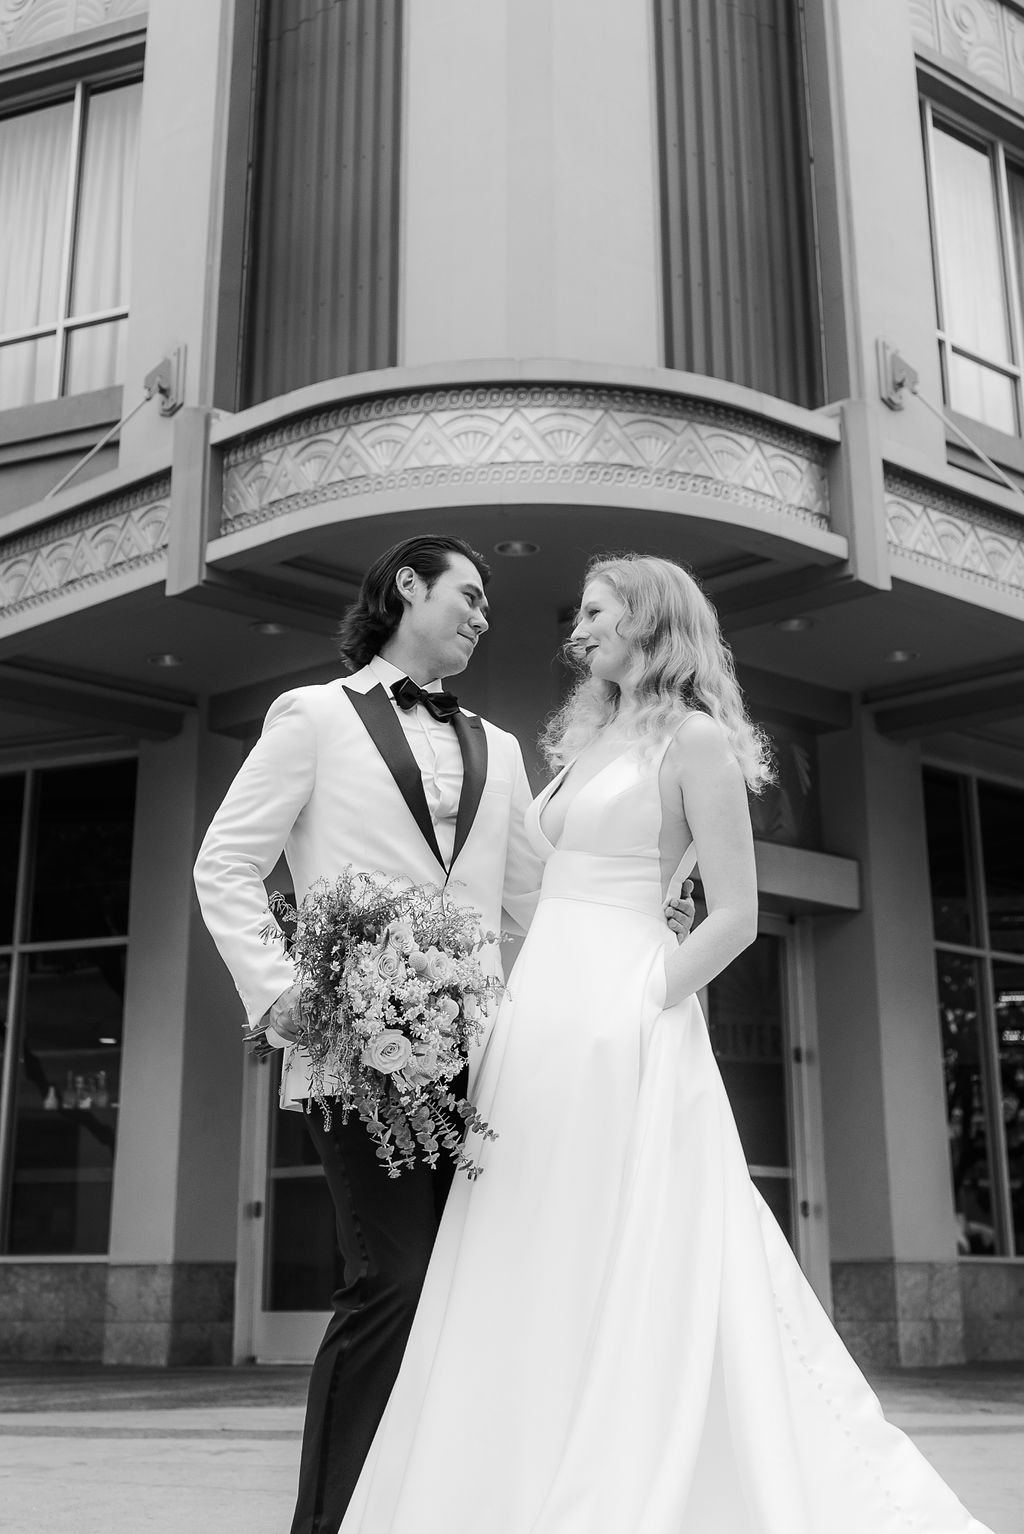 LA bride and groom inspired by classic old hollywood 60's style for their wedding